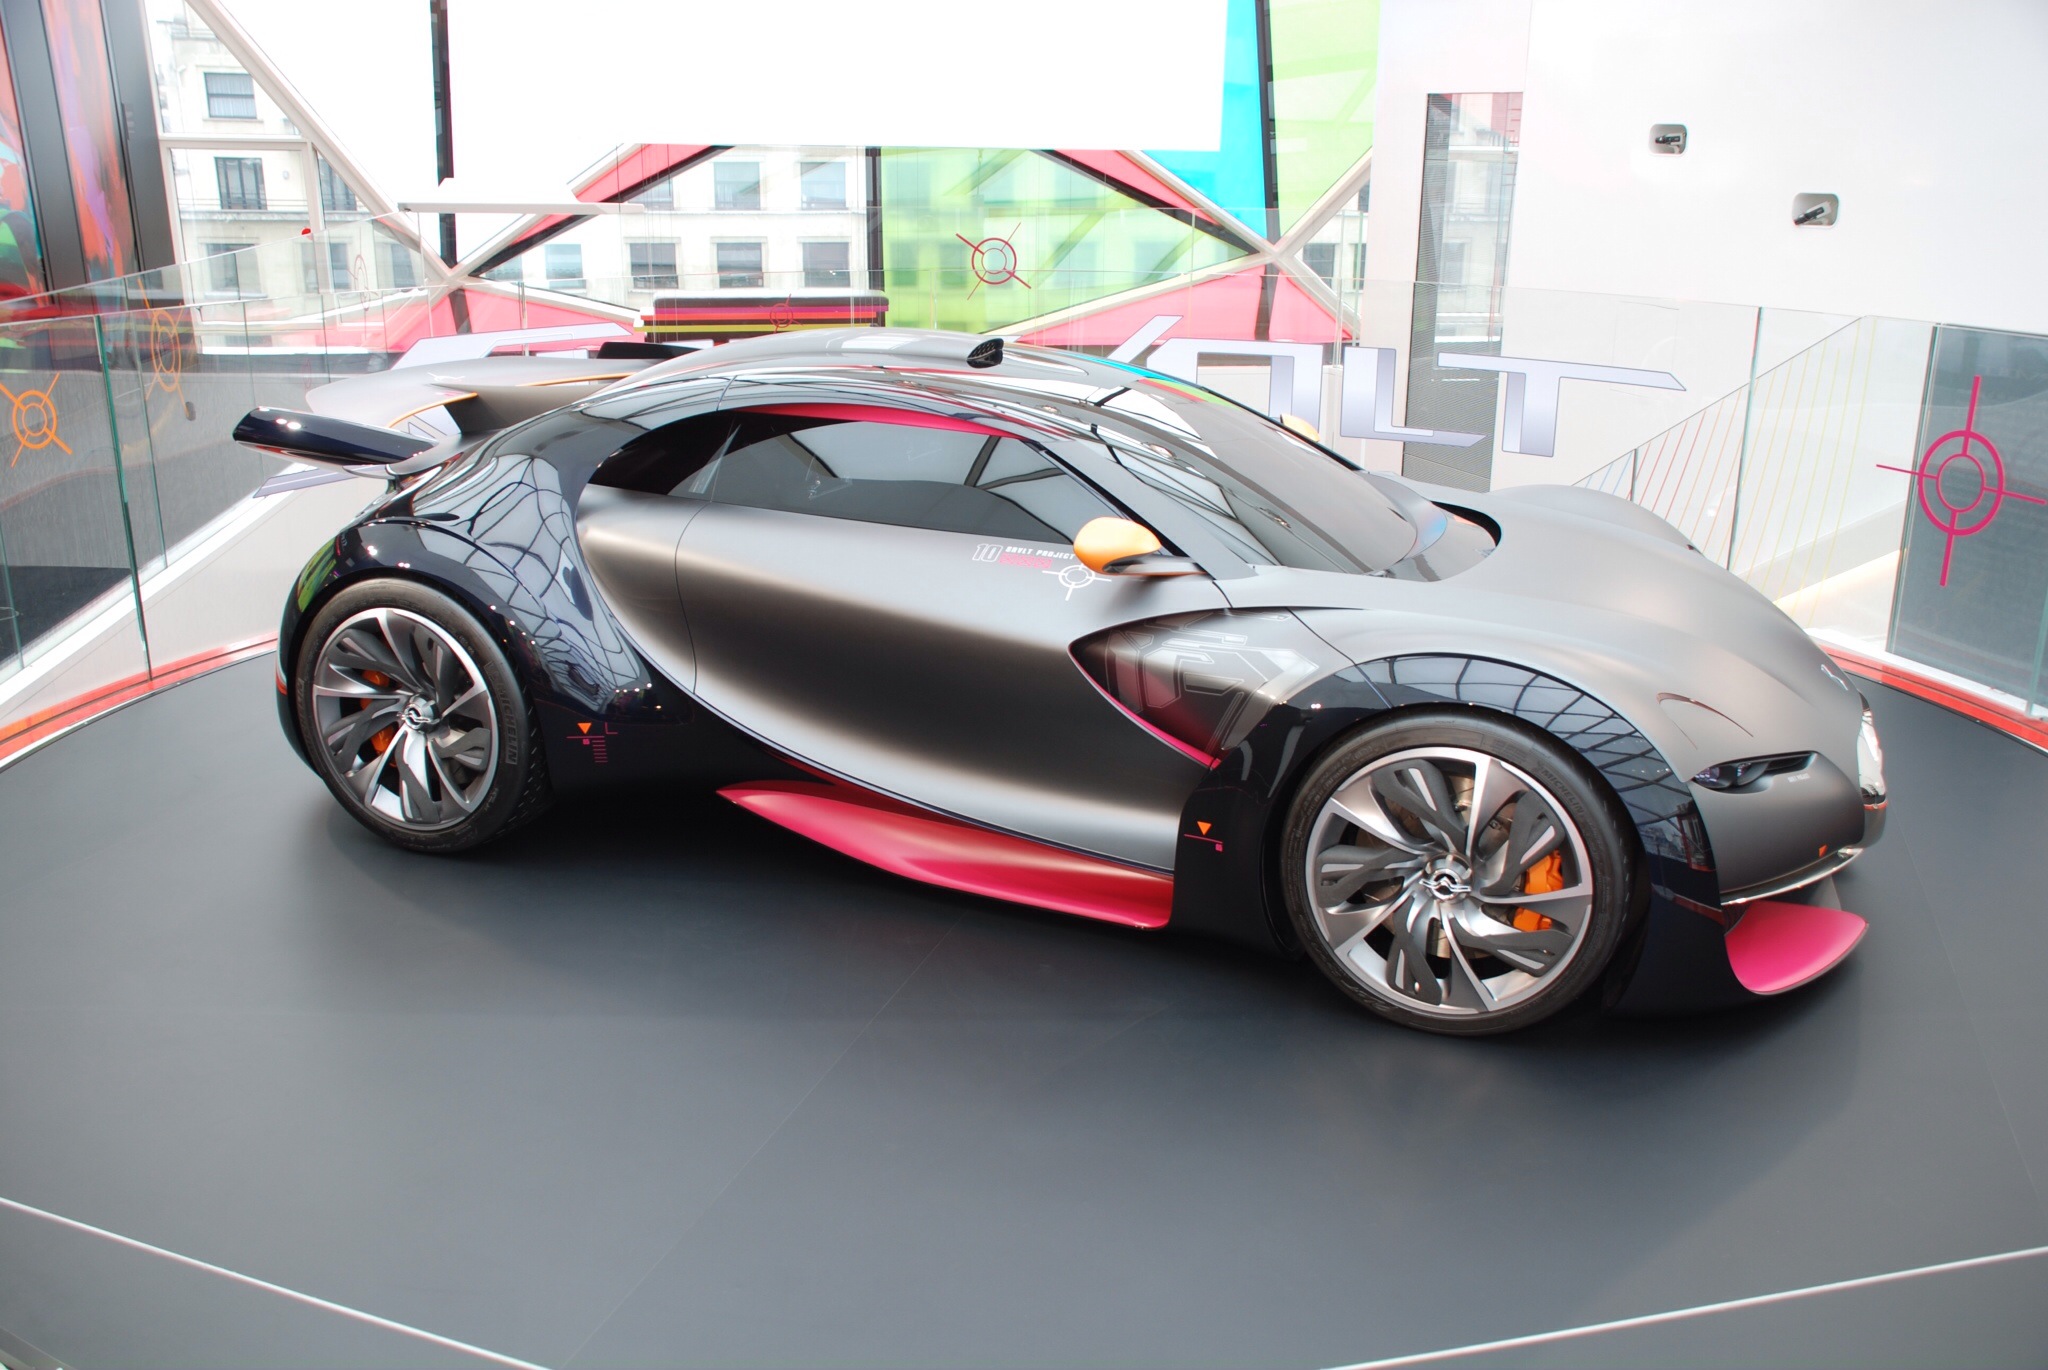 the car has pink interior and is parked on a large display